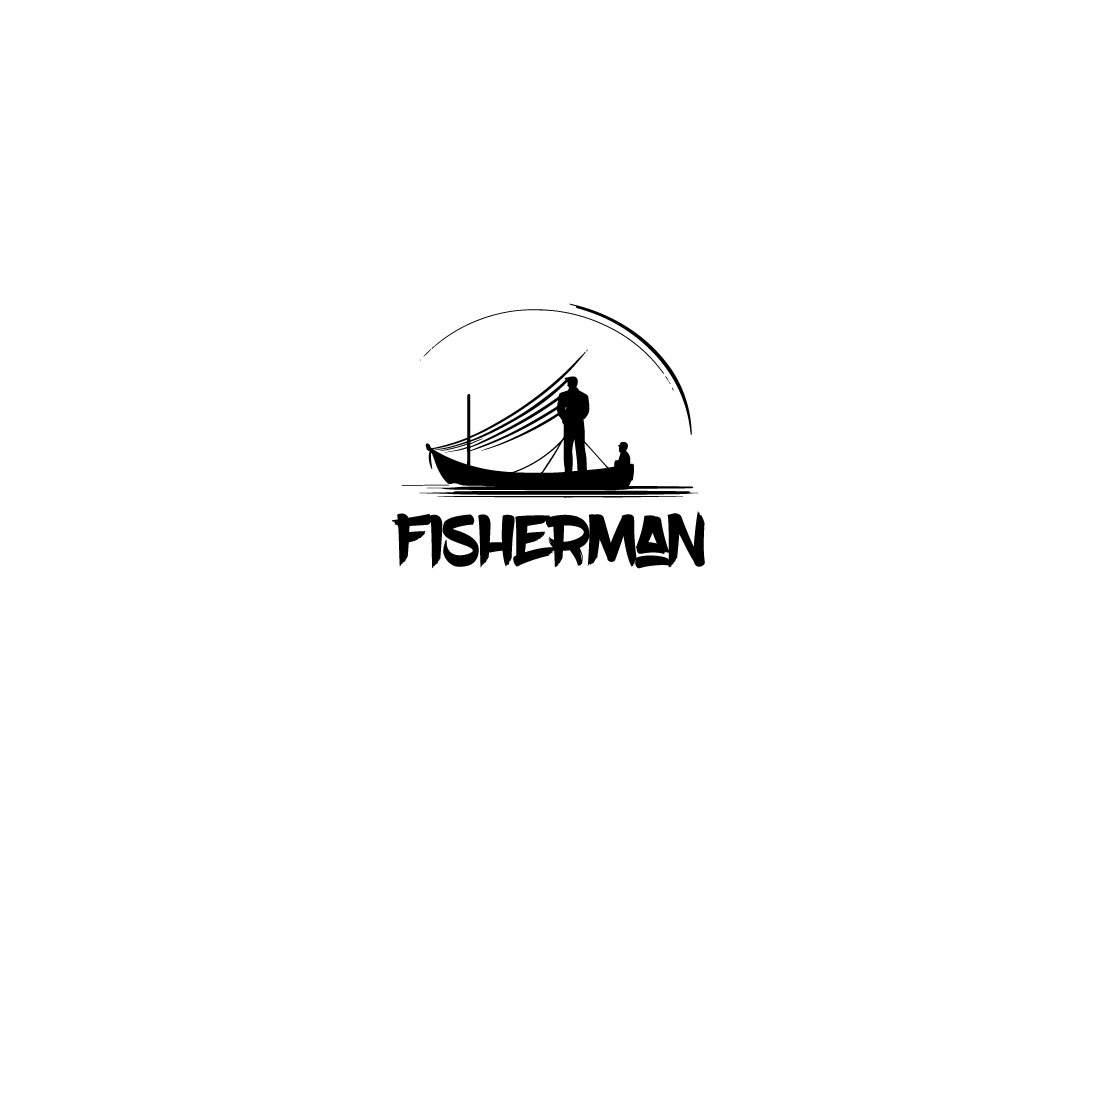 A Fisherman Logo for Fishing Charters and Food Fish Brands preview image.